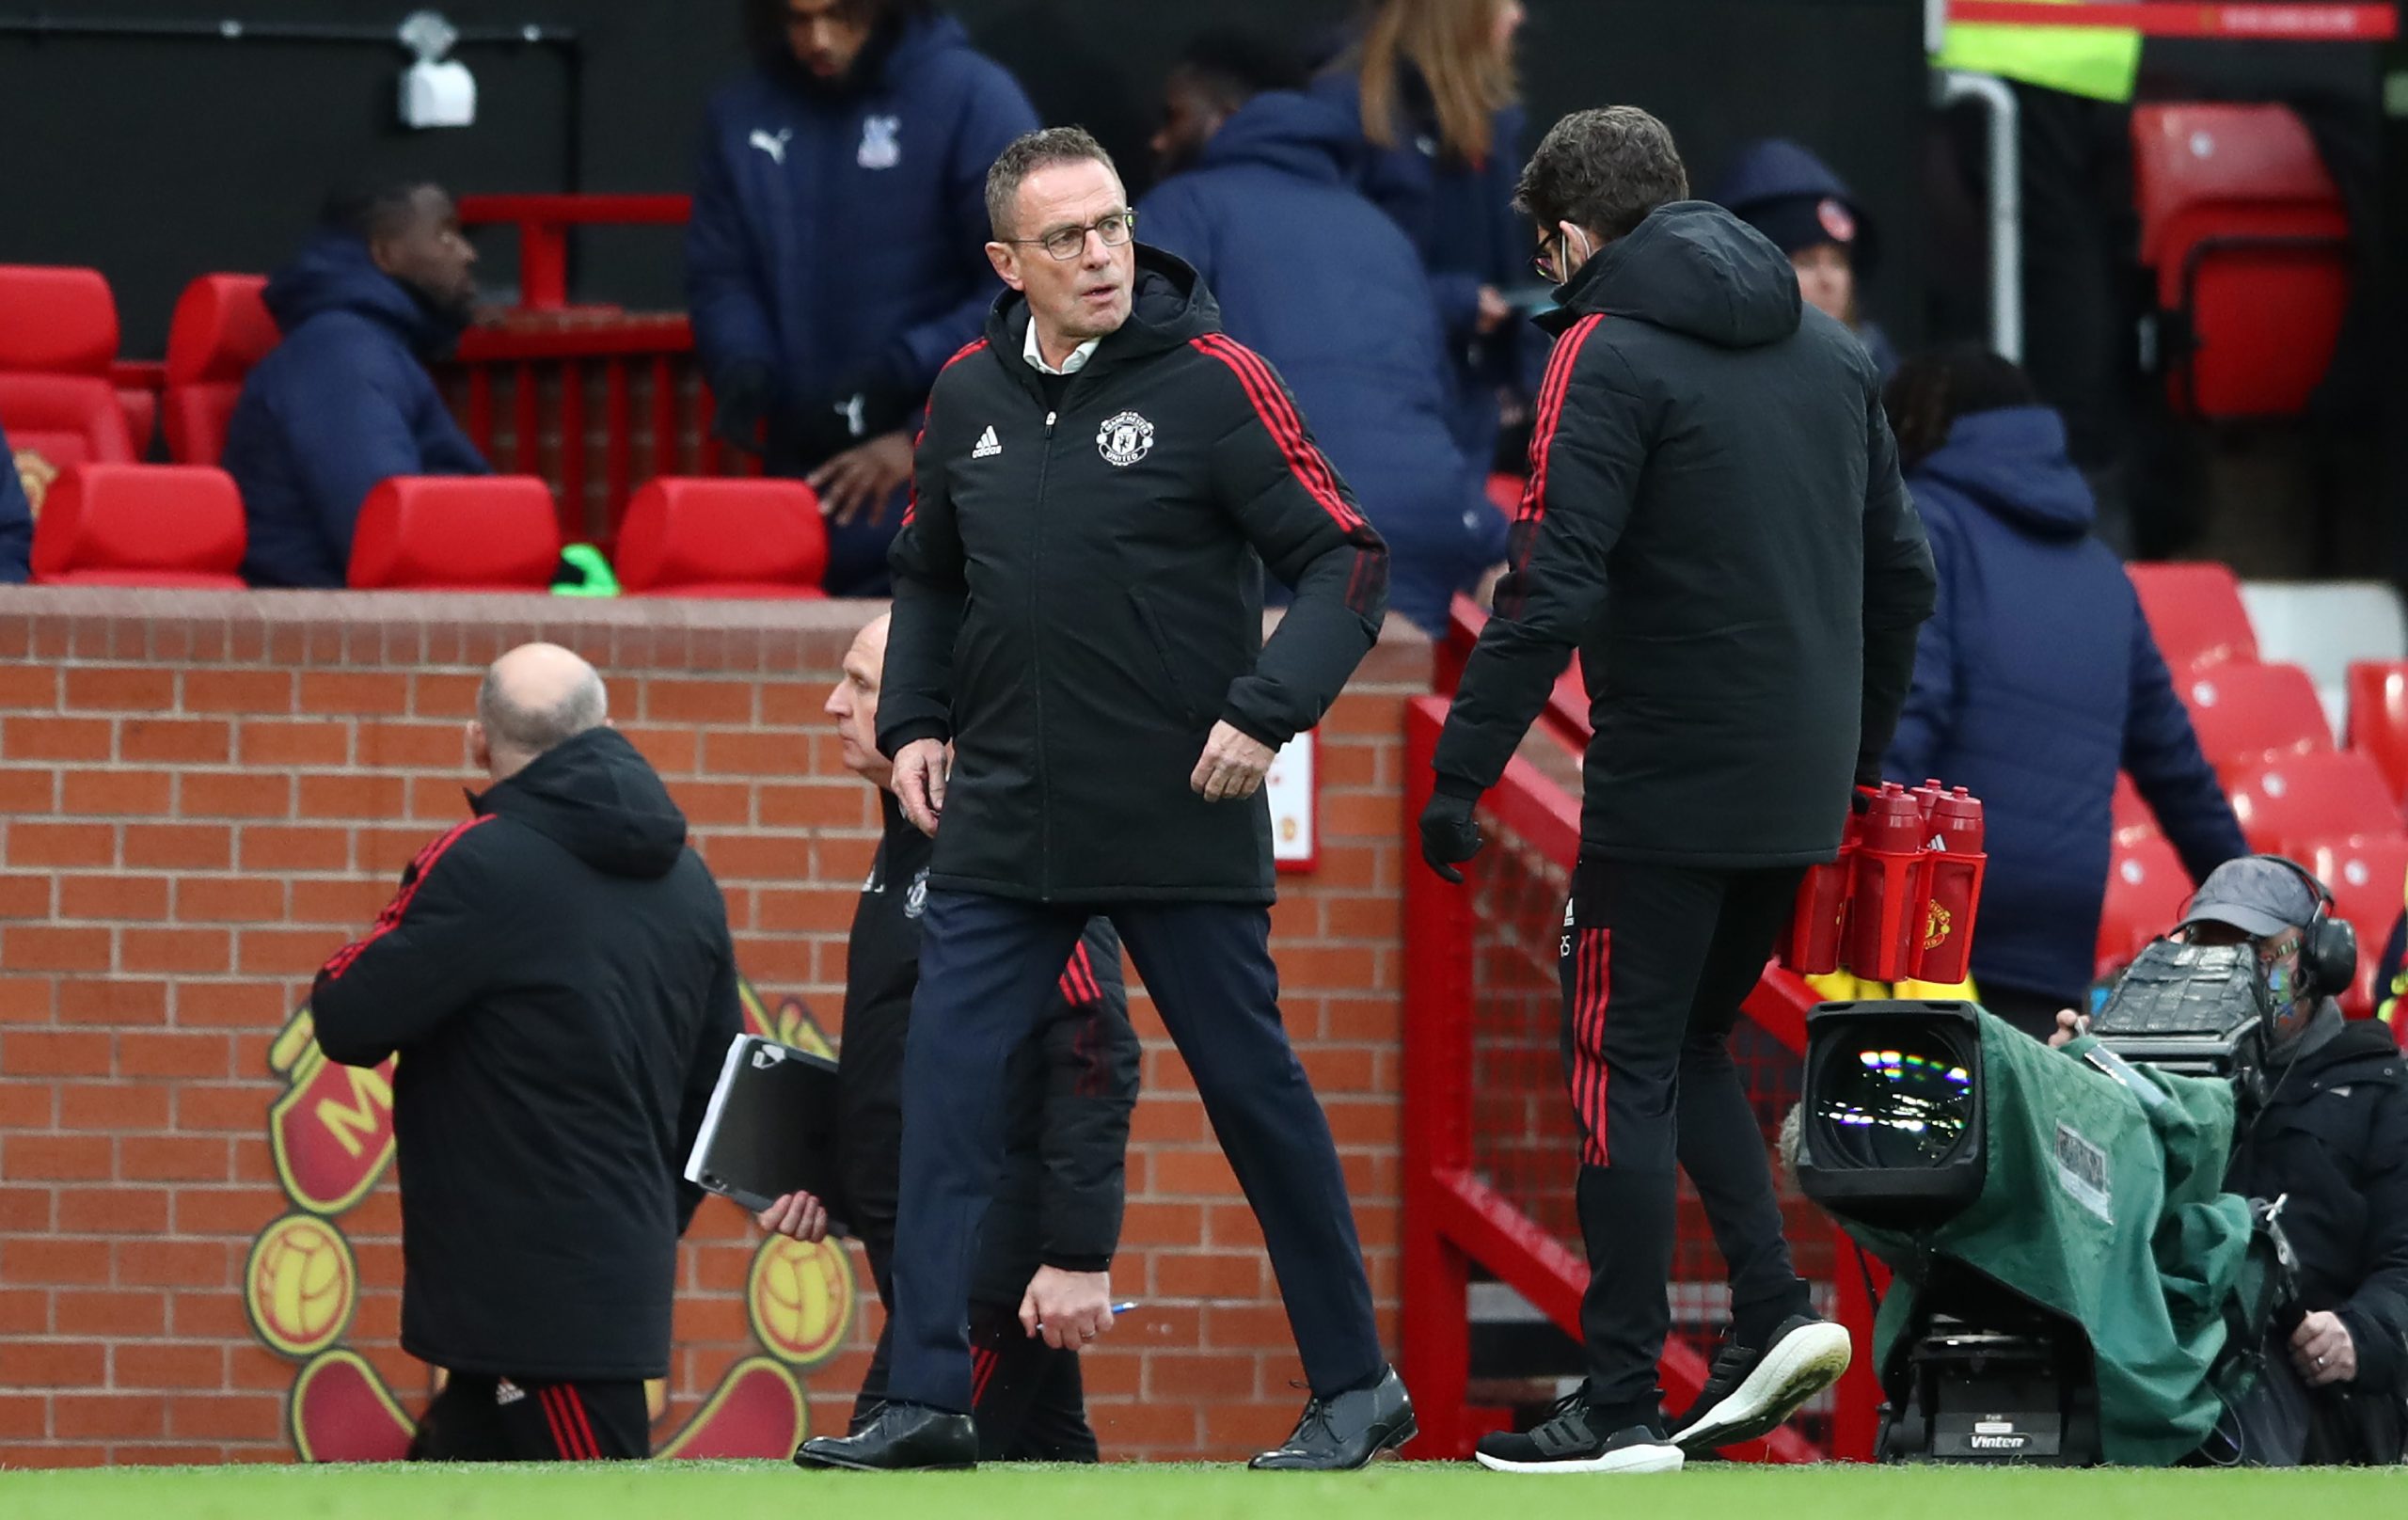 Trouble in paradise as Man United players turn on Rangnick following public dressing downs